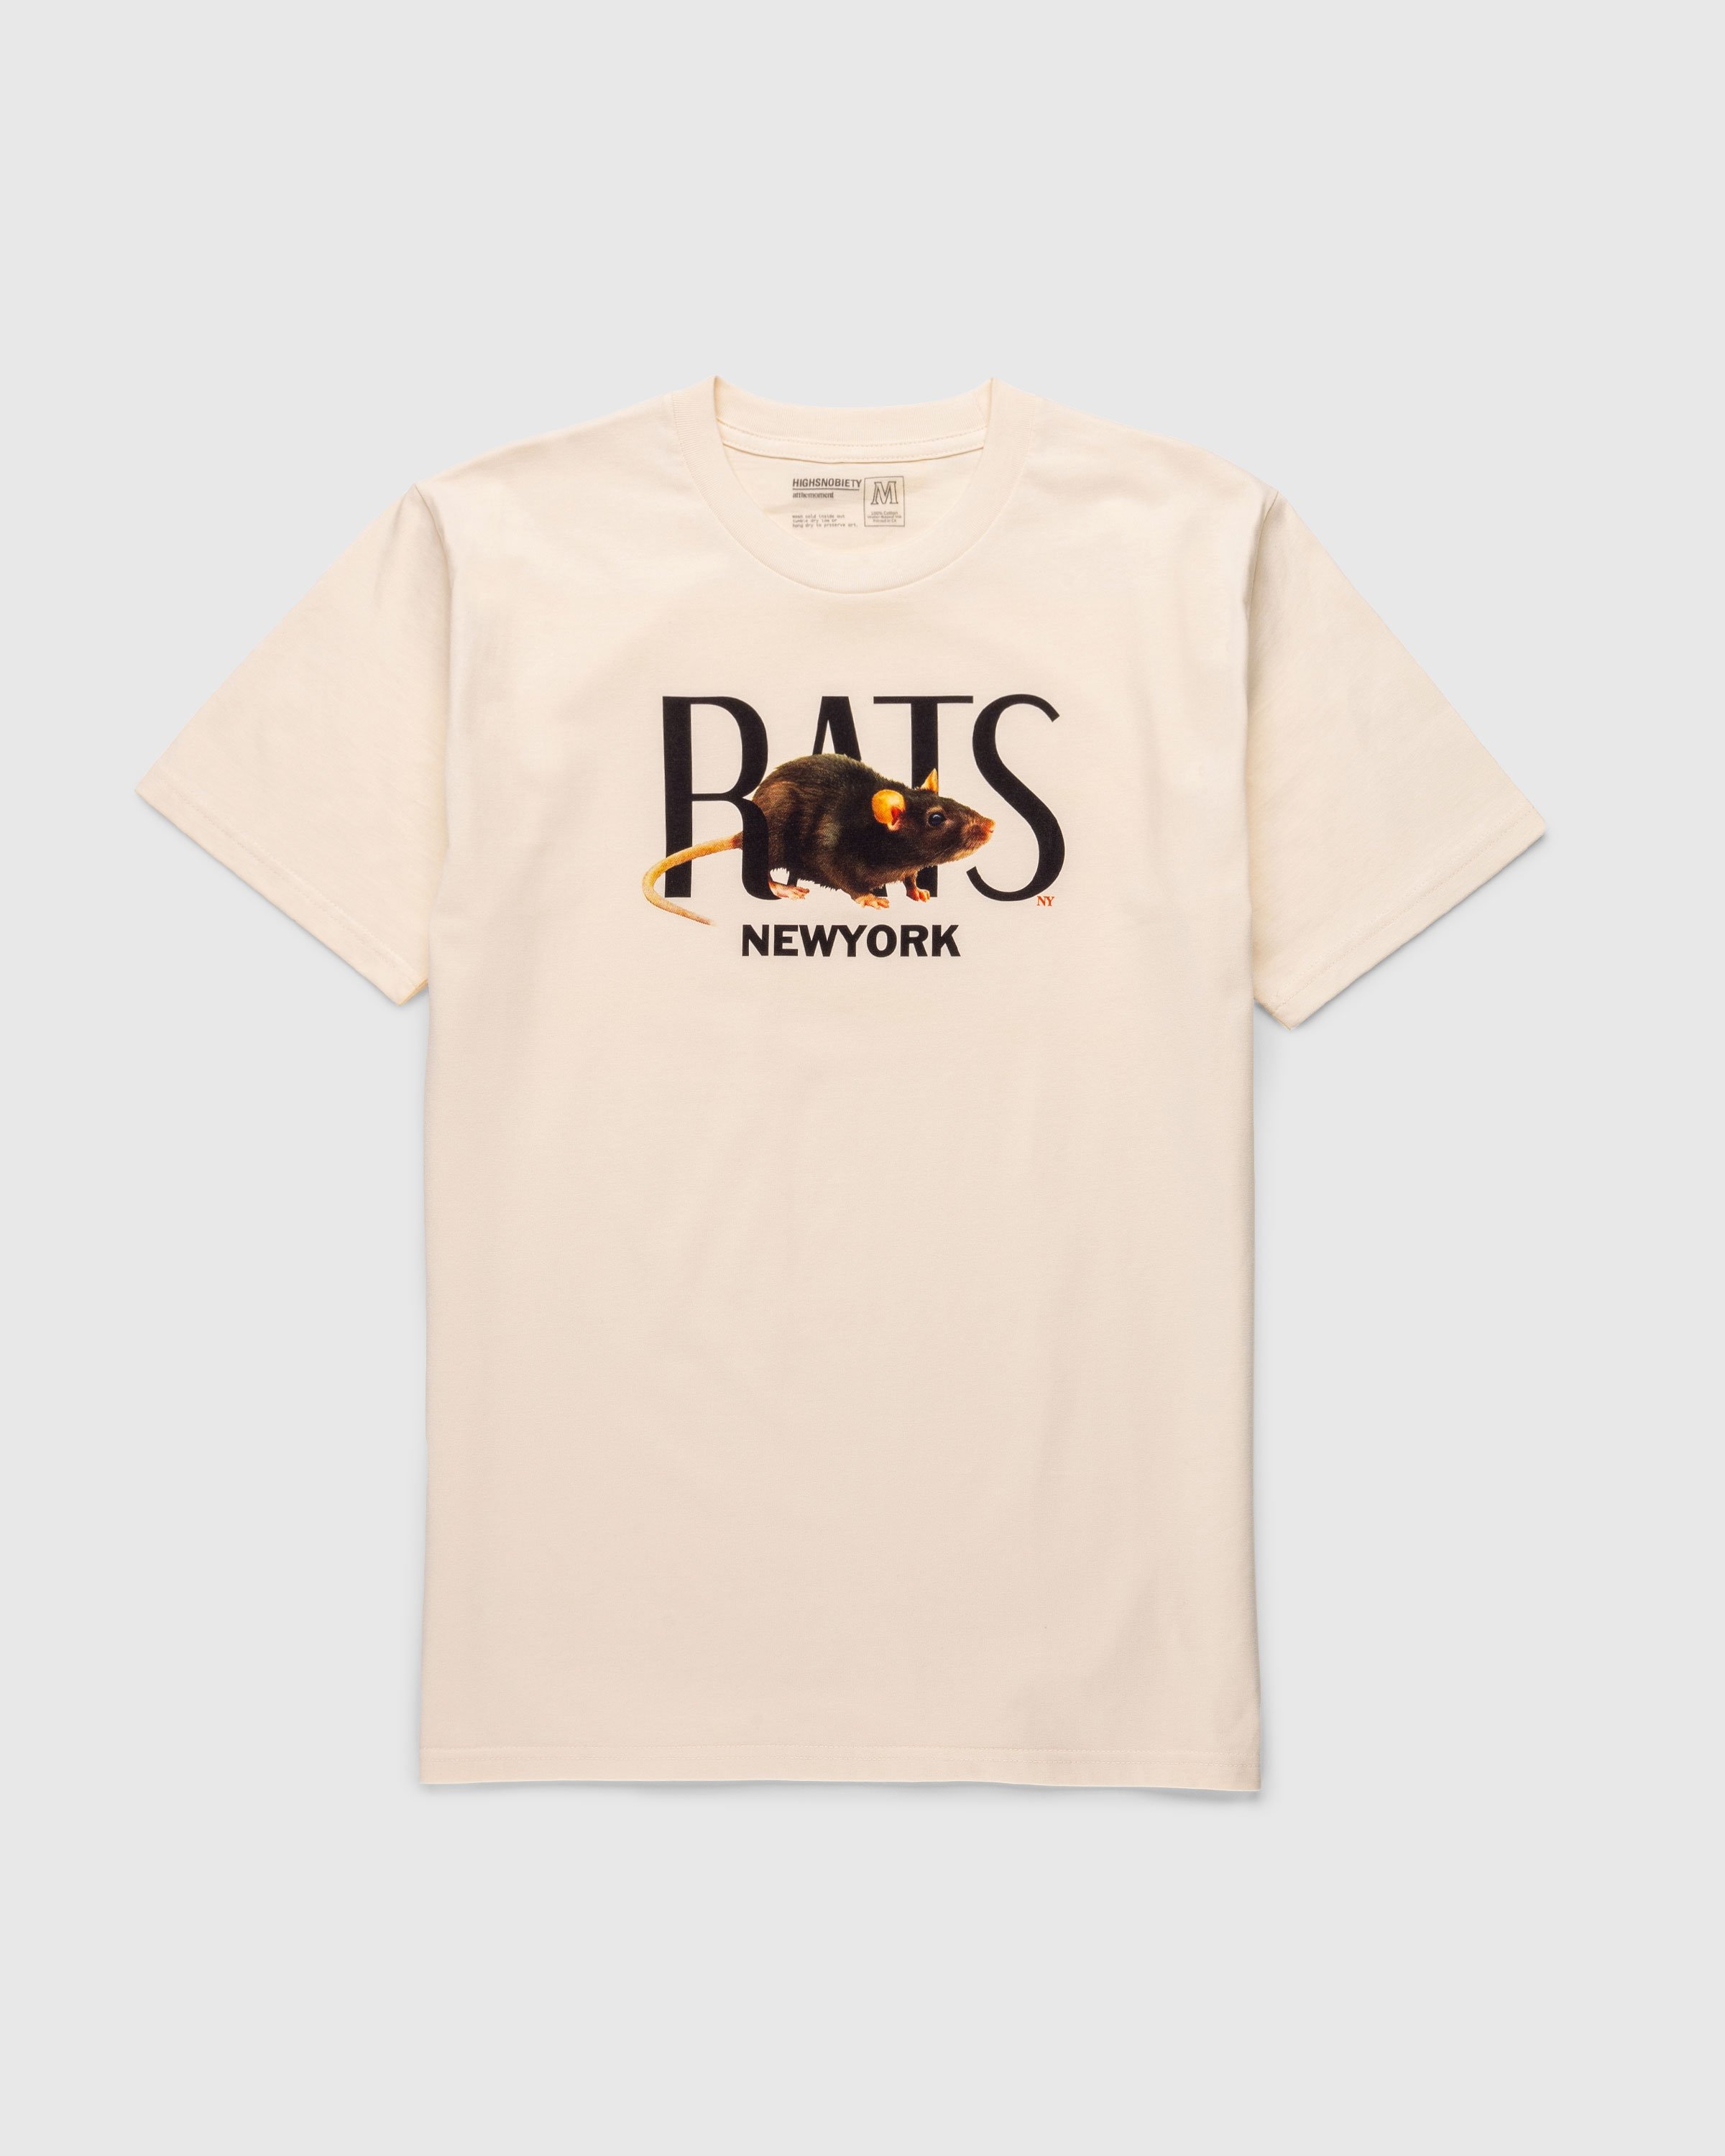 At The Moment x Highsnobiety - New York Rats T-Shirt - Clothing - Beige - Image 1